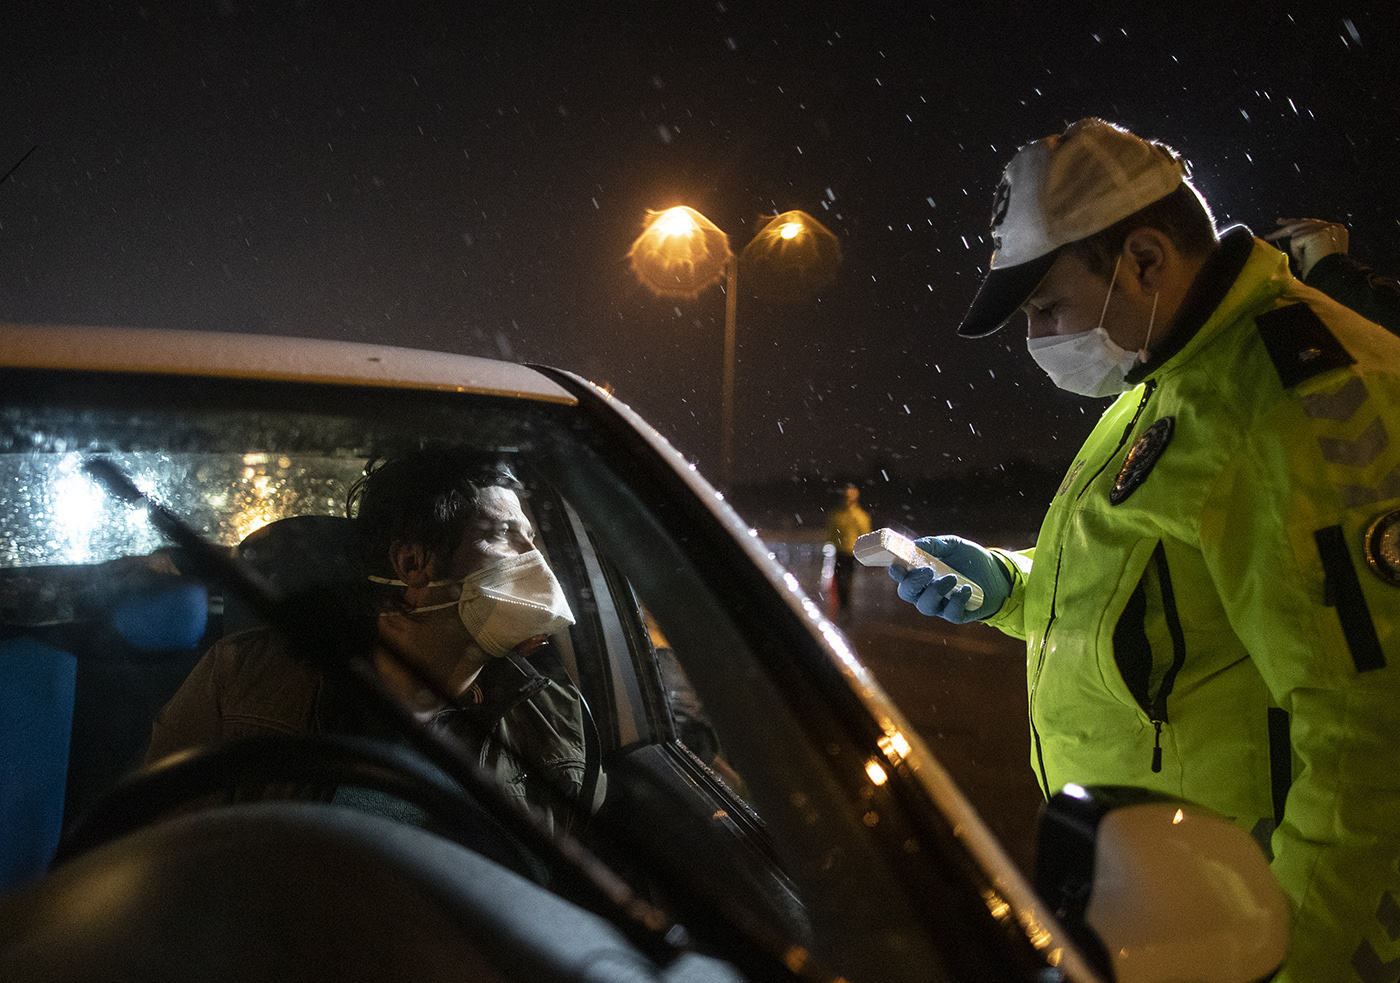 A Turkish police officer checks the temperature of a driver at an exit of Istanbul, Turkey, 28 March 2020. According to reports Turkey has banned intercity bus travel walks and fishing along the seashore and beaches, as well as jogging in forests and parks on weekends amid coronavirus outbreak for thirty metropolitan cities